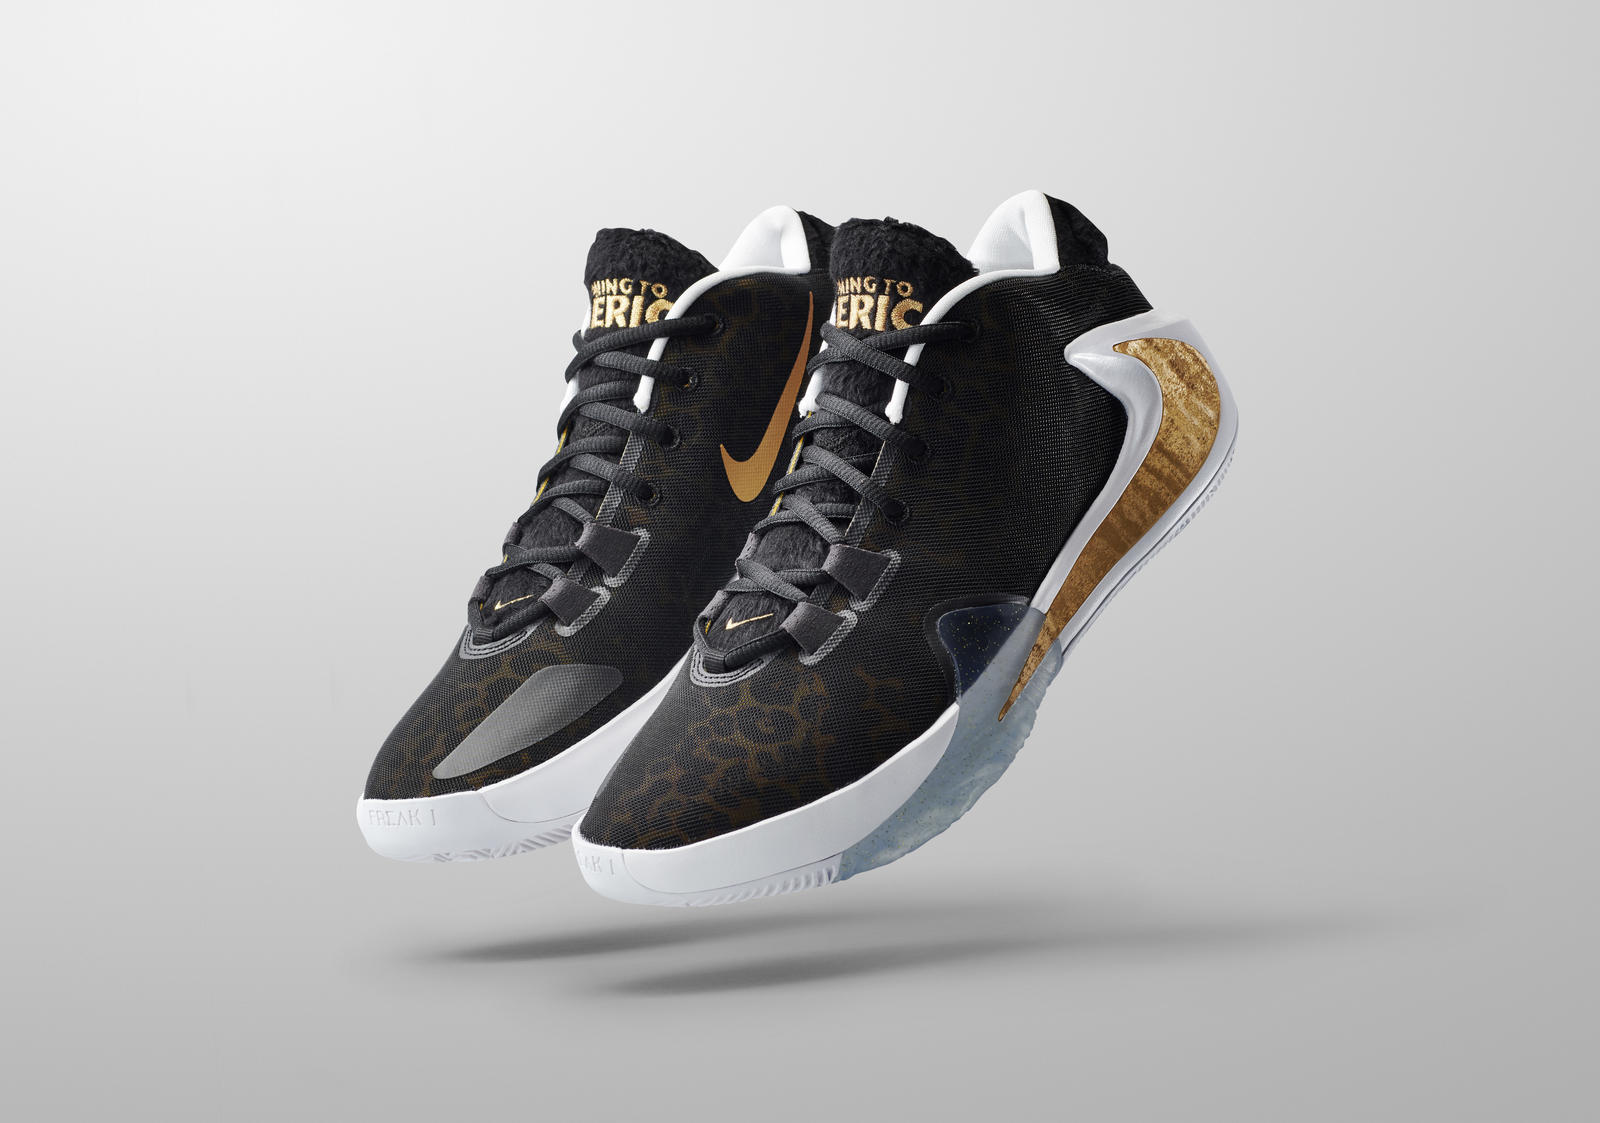 coming to america giannis shoes